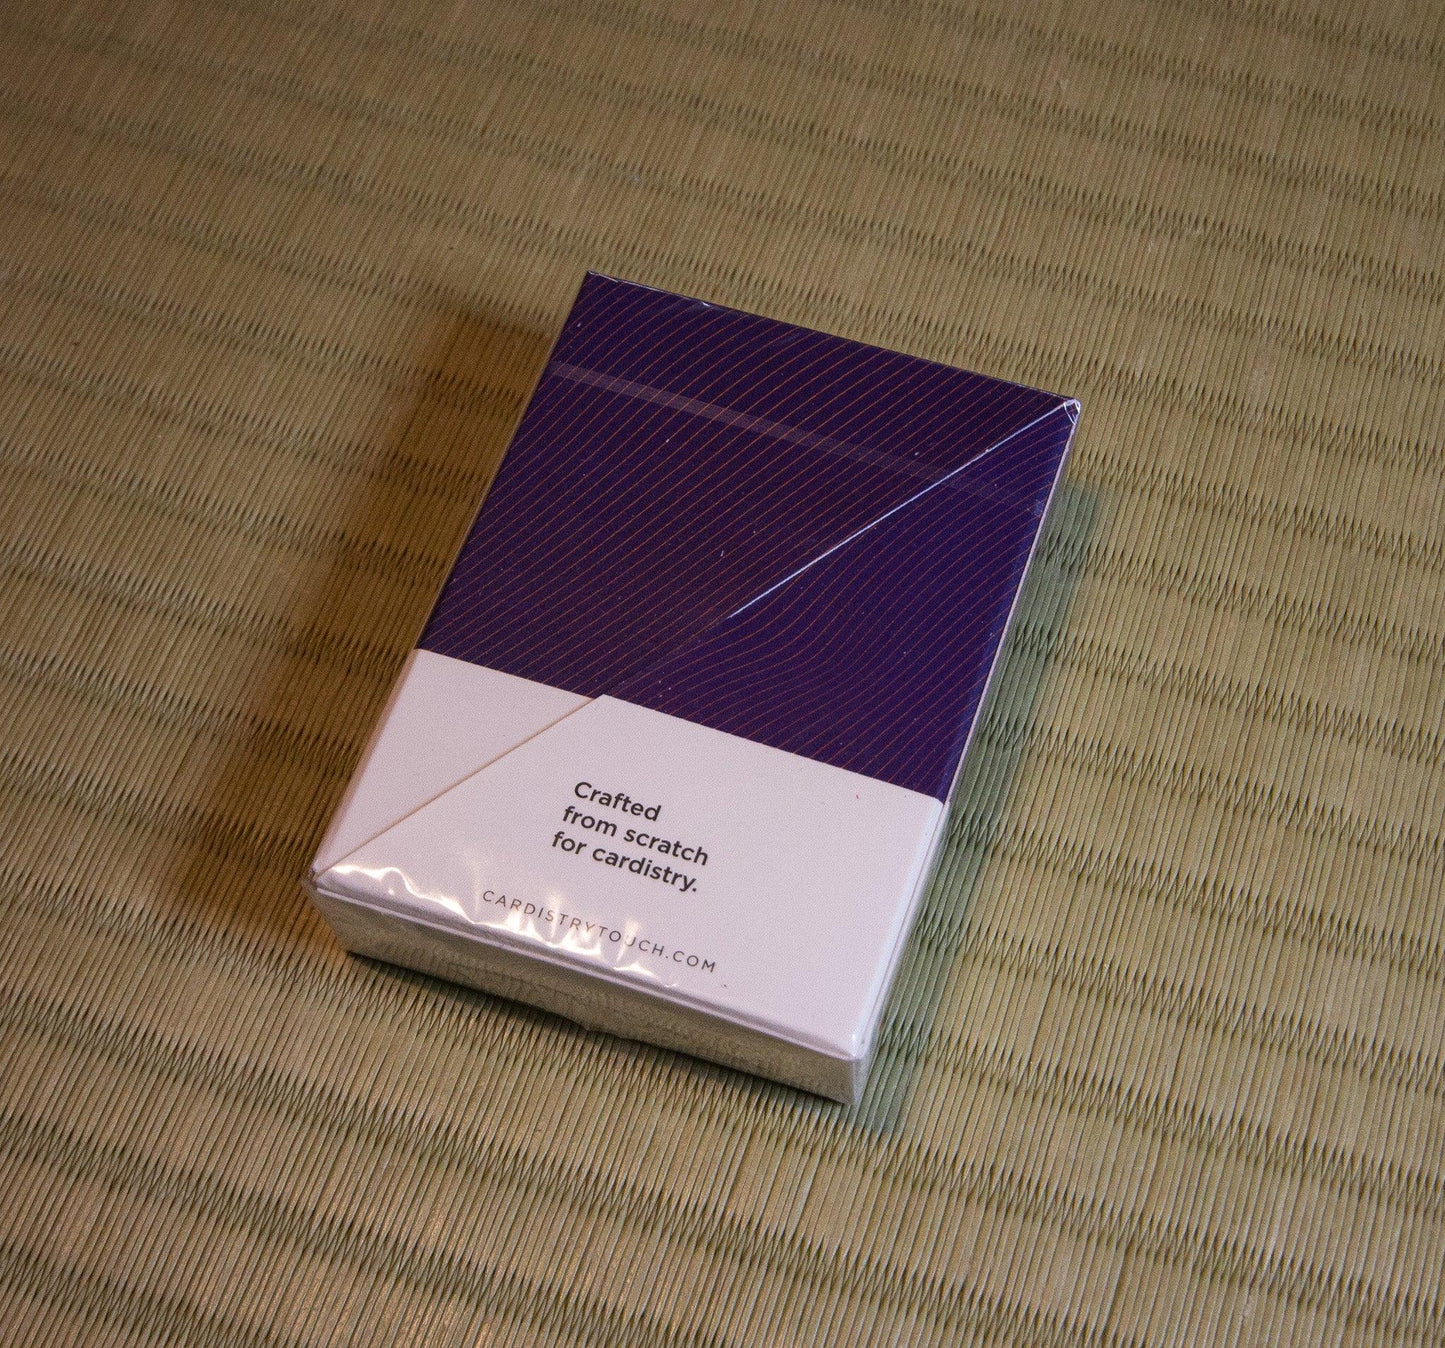 Derive Prune Edition Playing Cards by Cardistry Touch - Deckita Decks